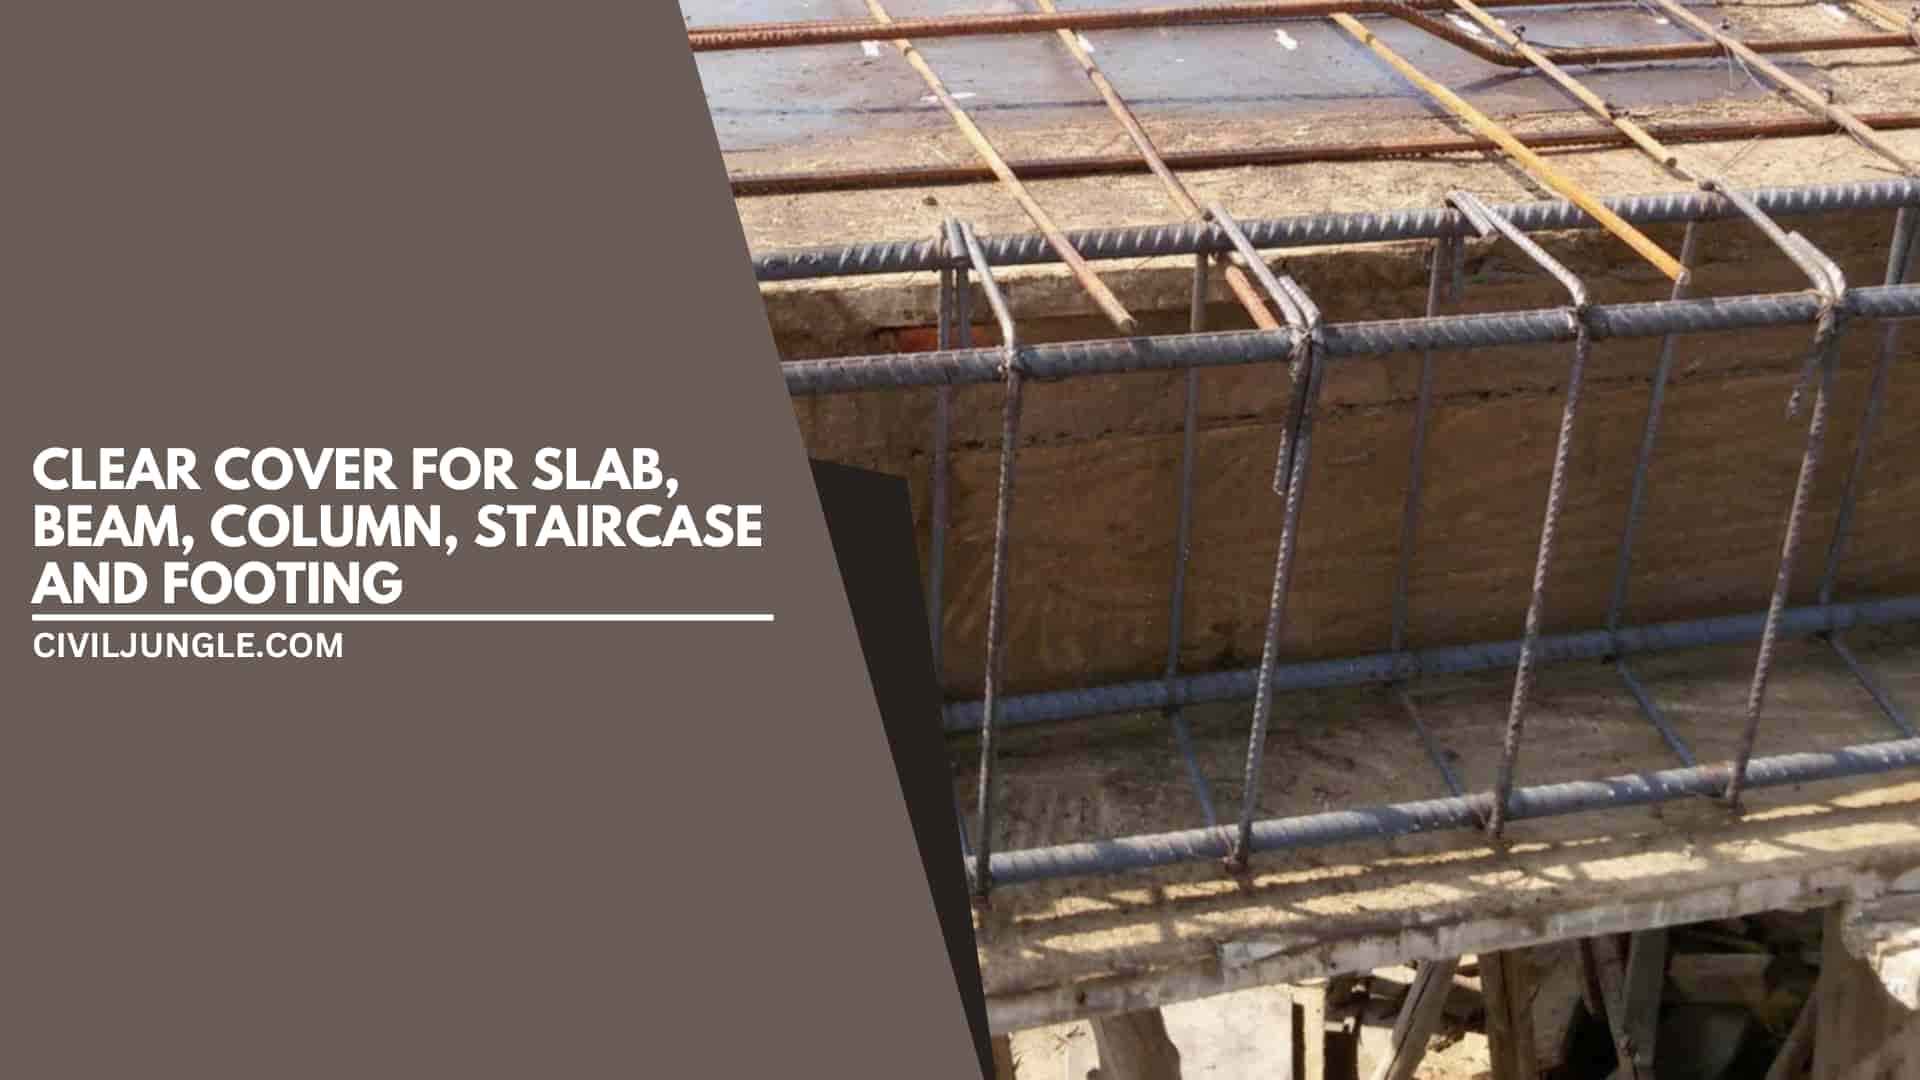 Clear Cover for Slab, Beam, Column, Staircase and Footing